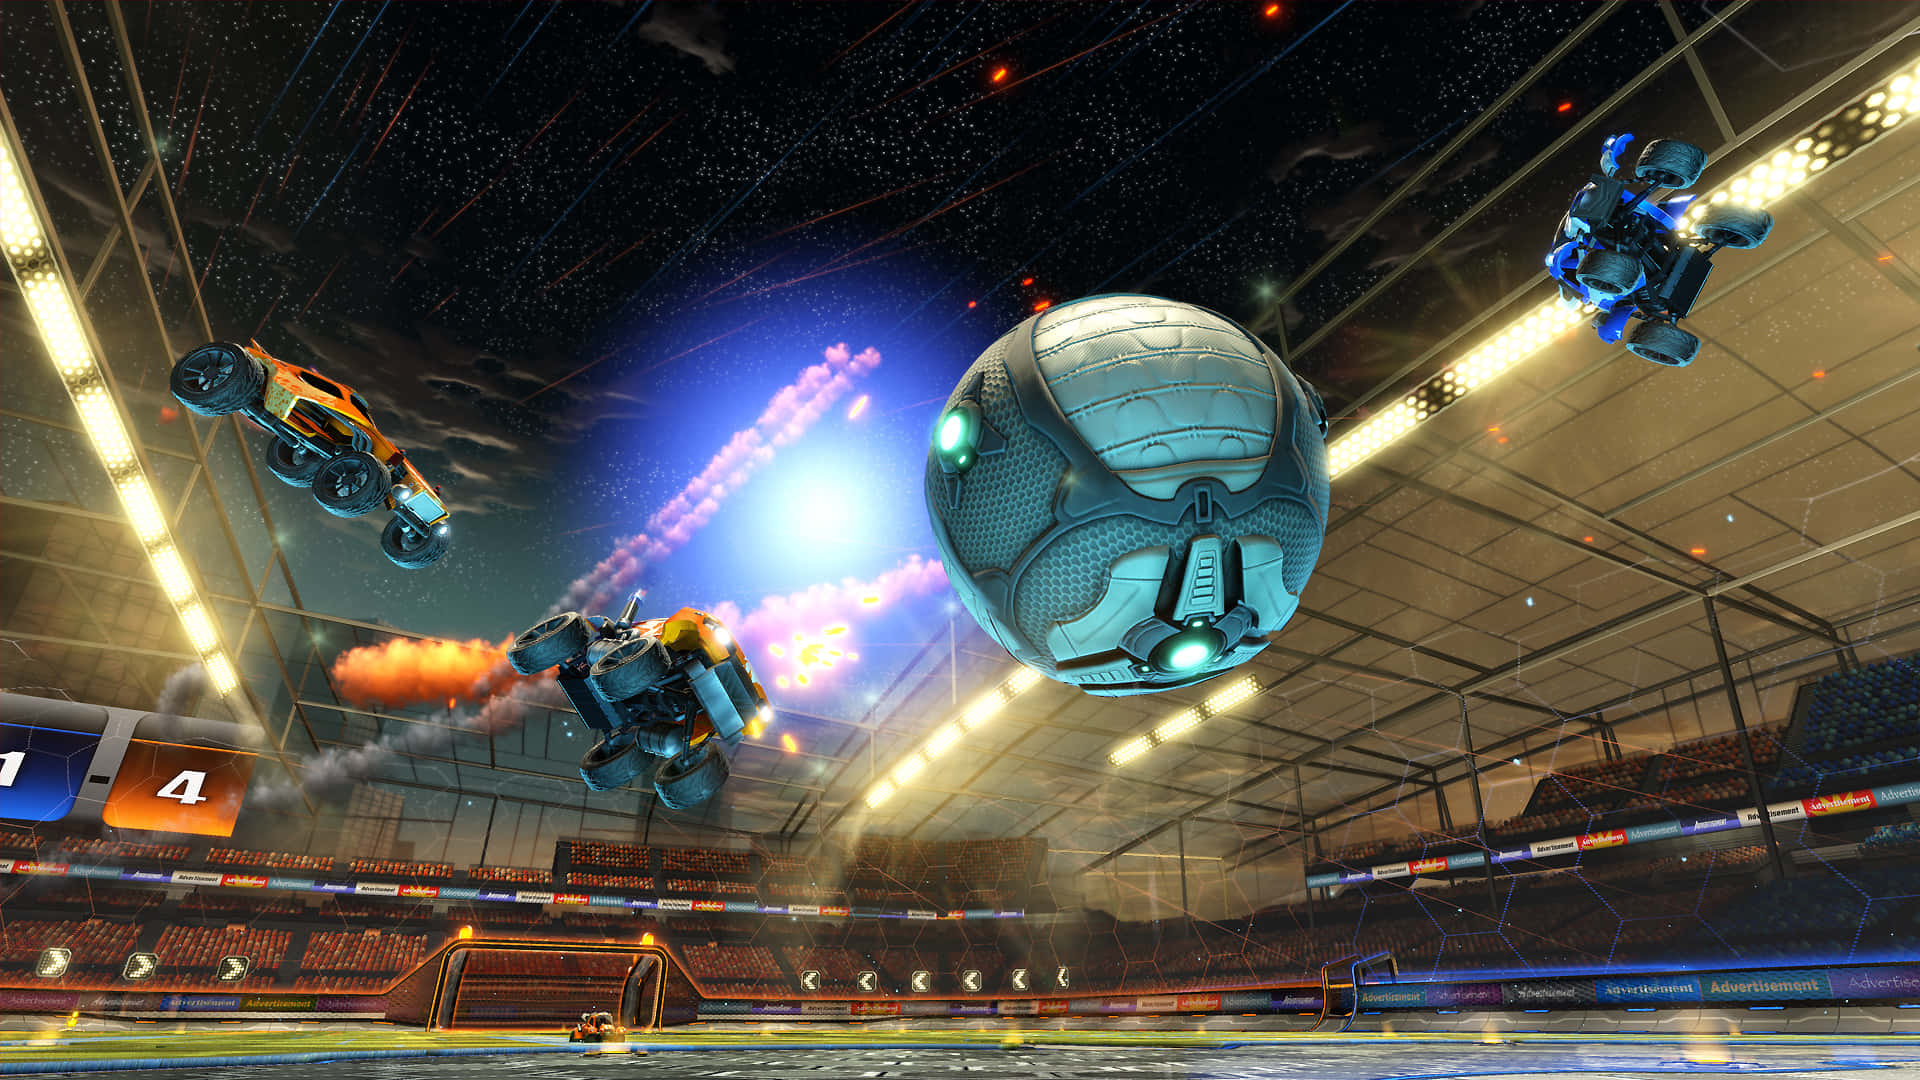 "The Excitement of Rocket League at 1080p Resolution"